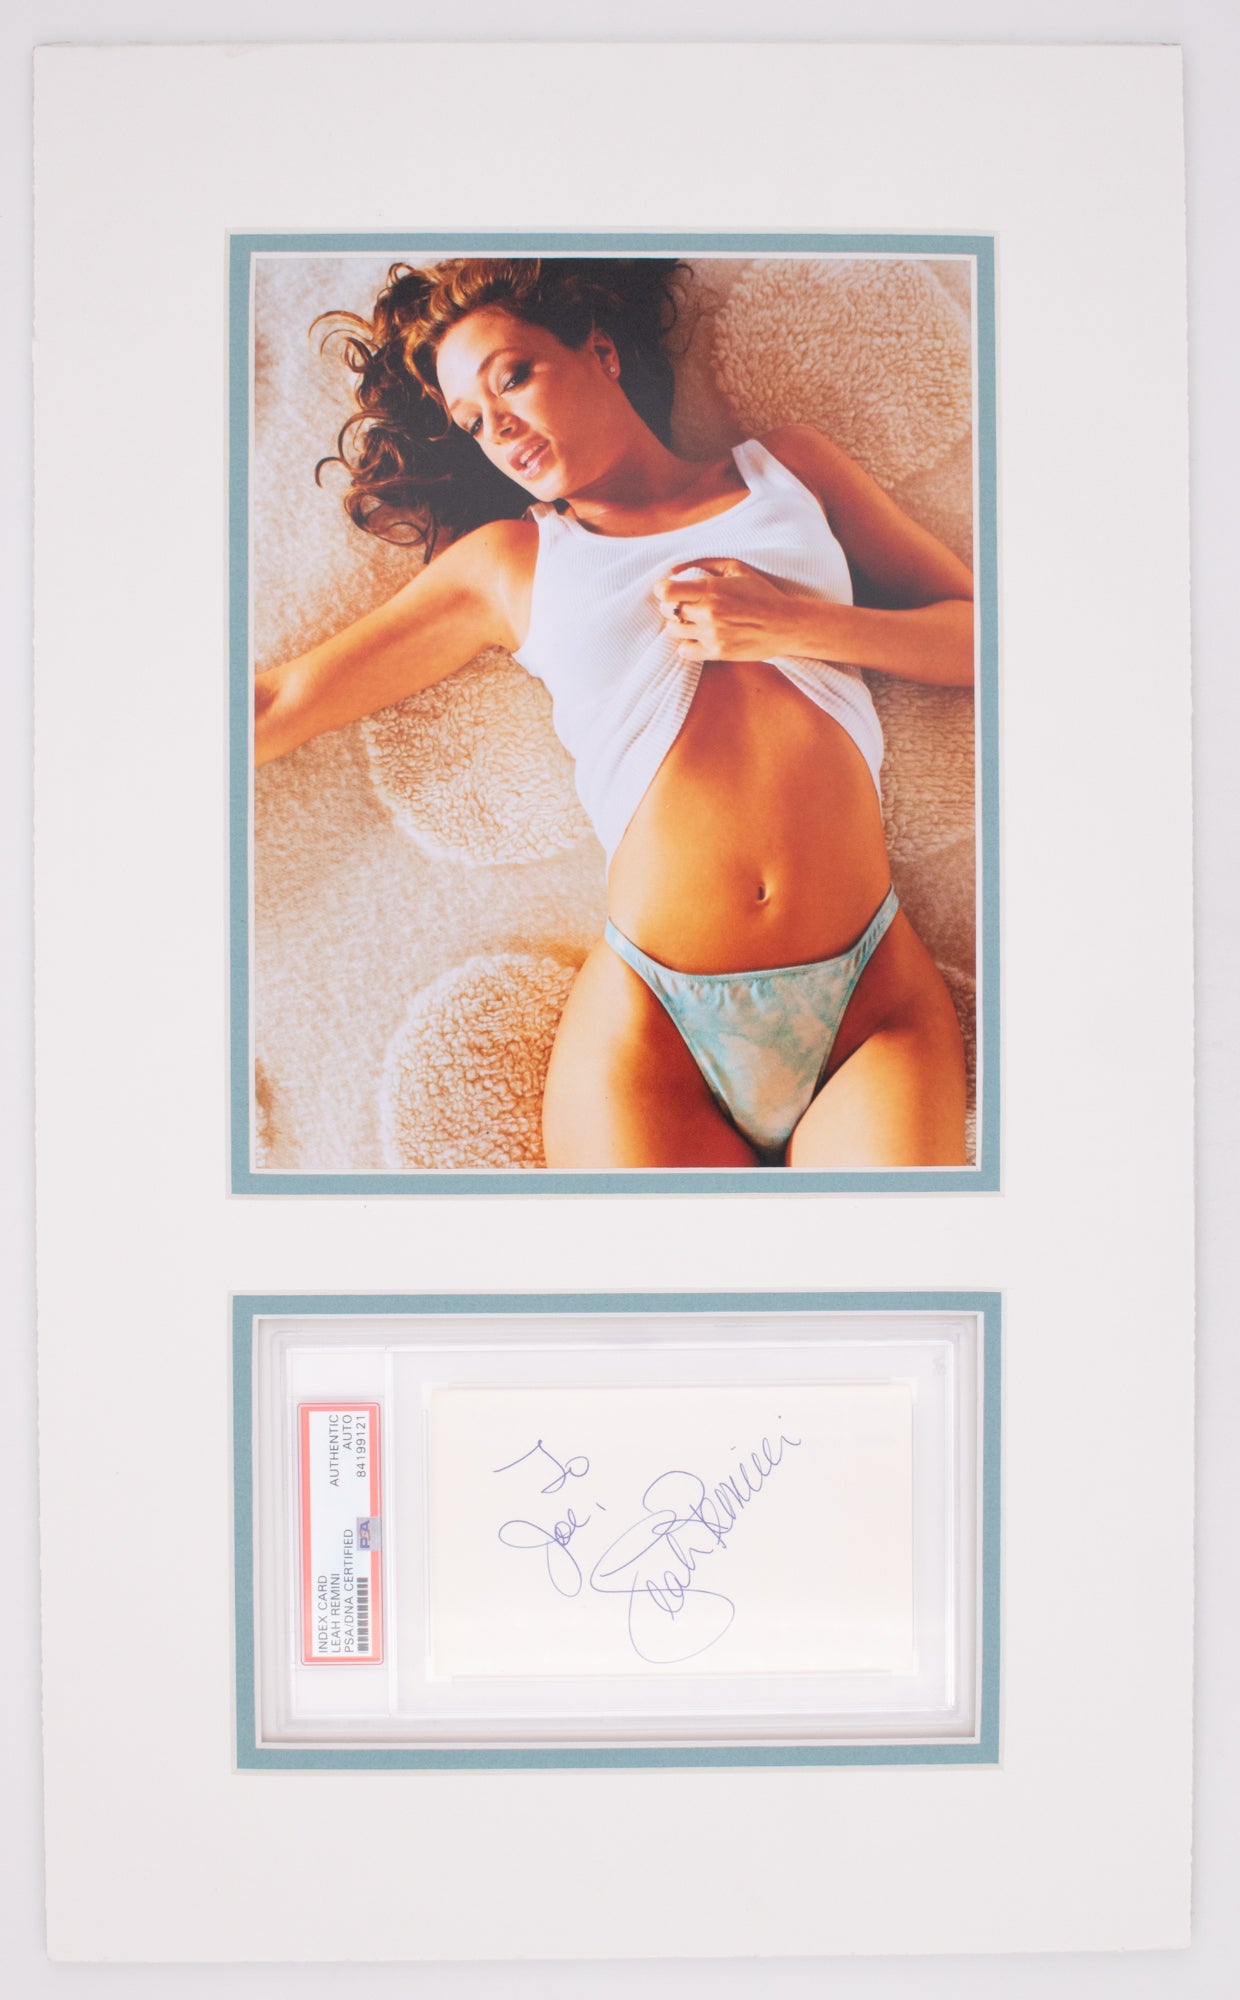 Leah Remini Signed Auto 3x5 Index Card Matted Photo Display PSA/DNA Authenticated